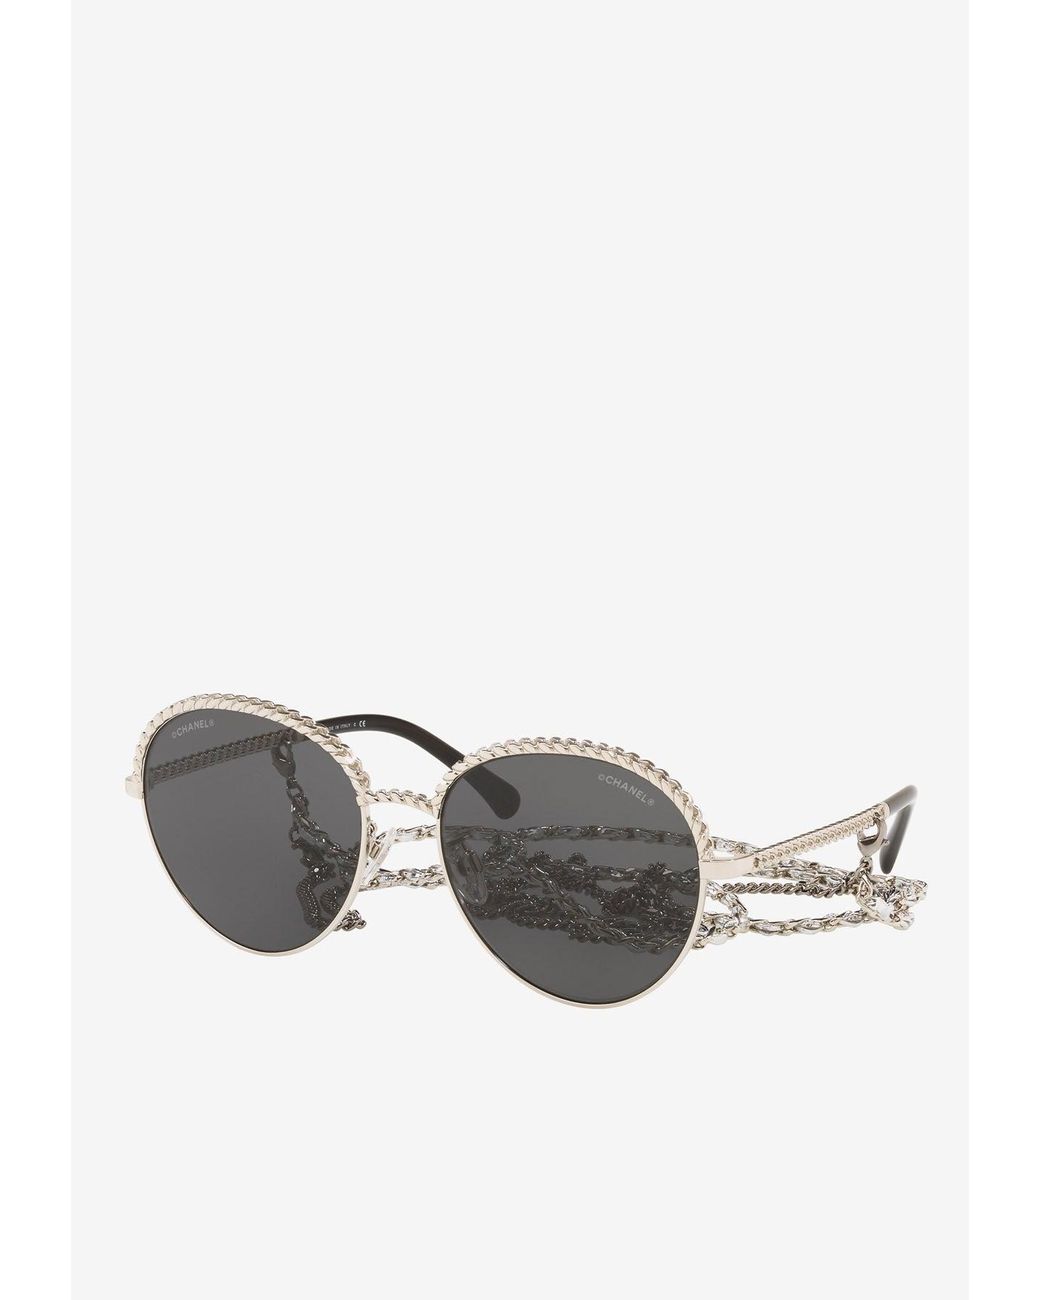 Chanel Pantos Round Chain Sunglasses in Gray